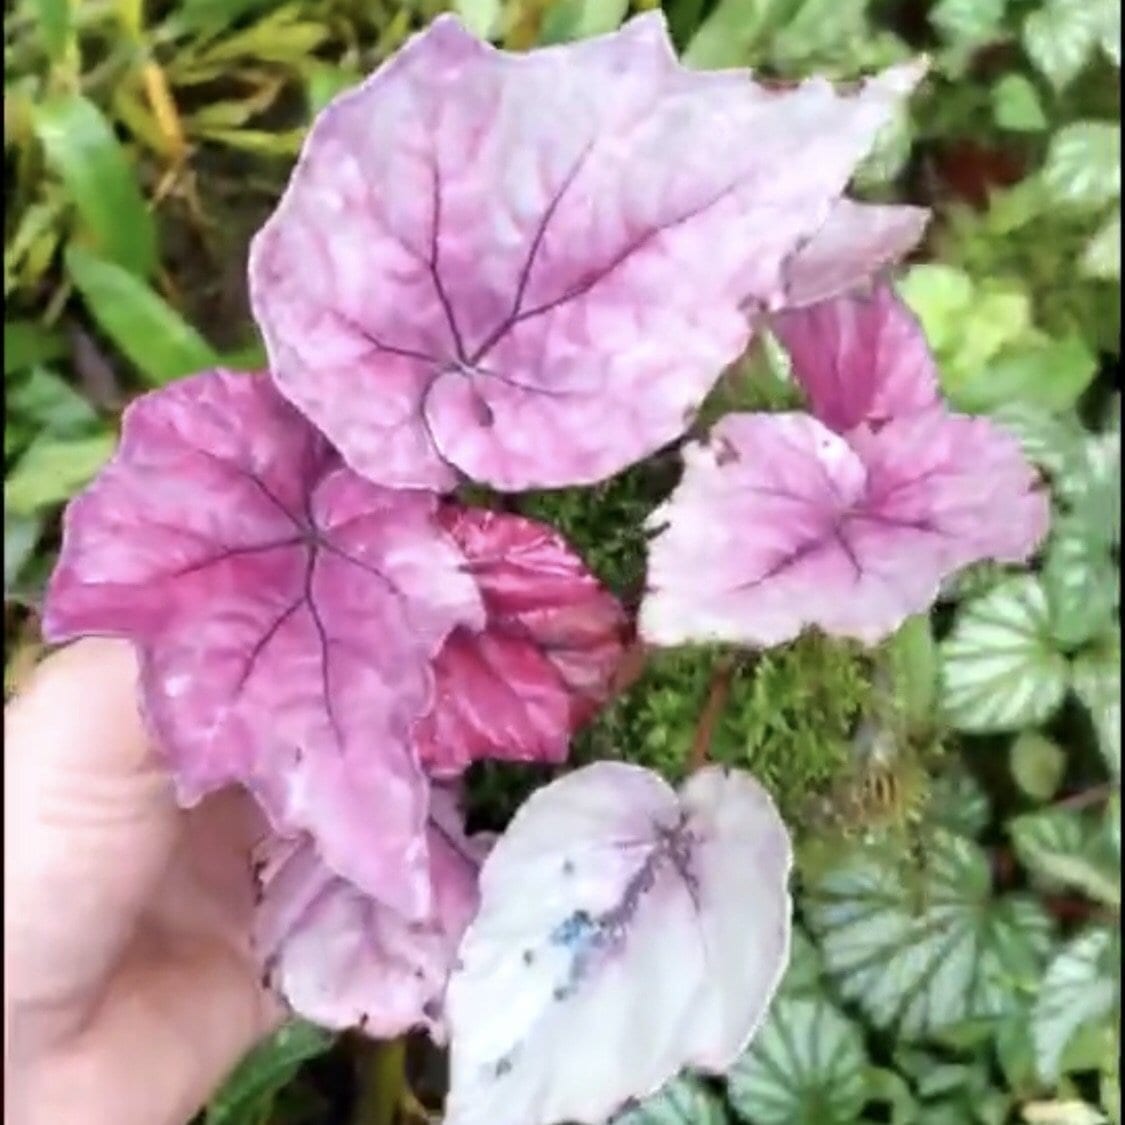 Begonia sp all pink